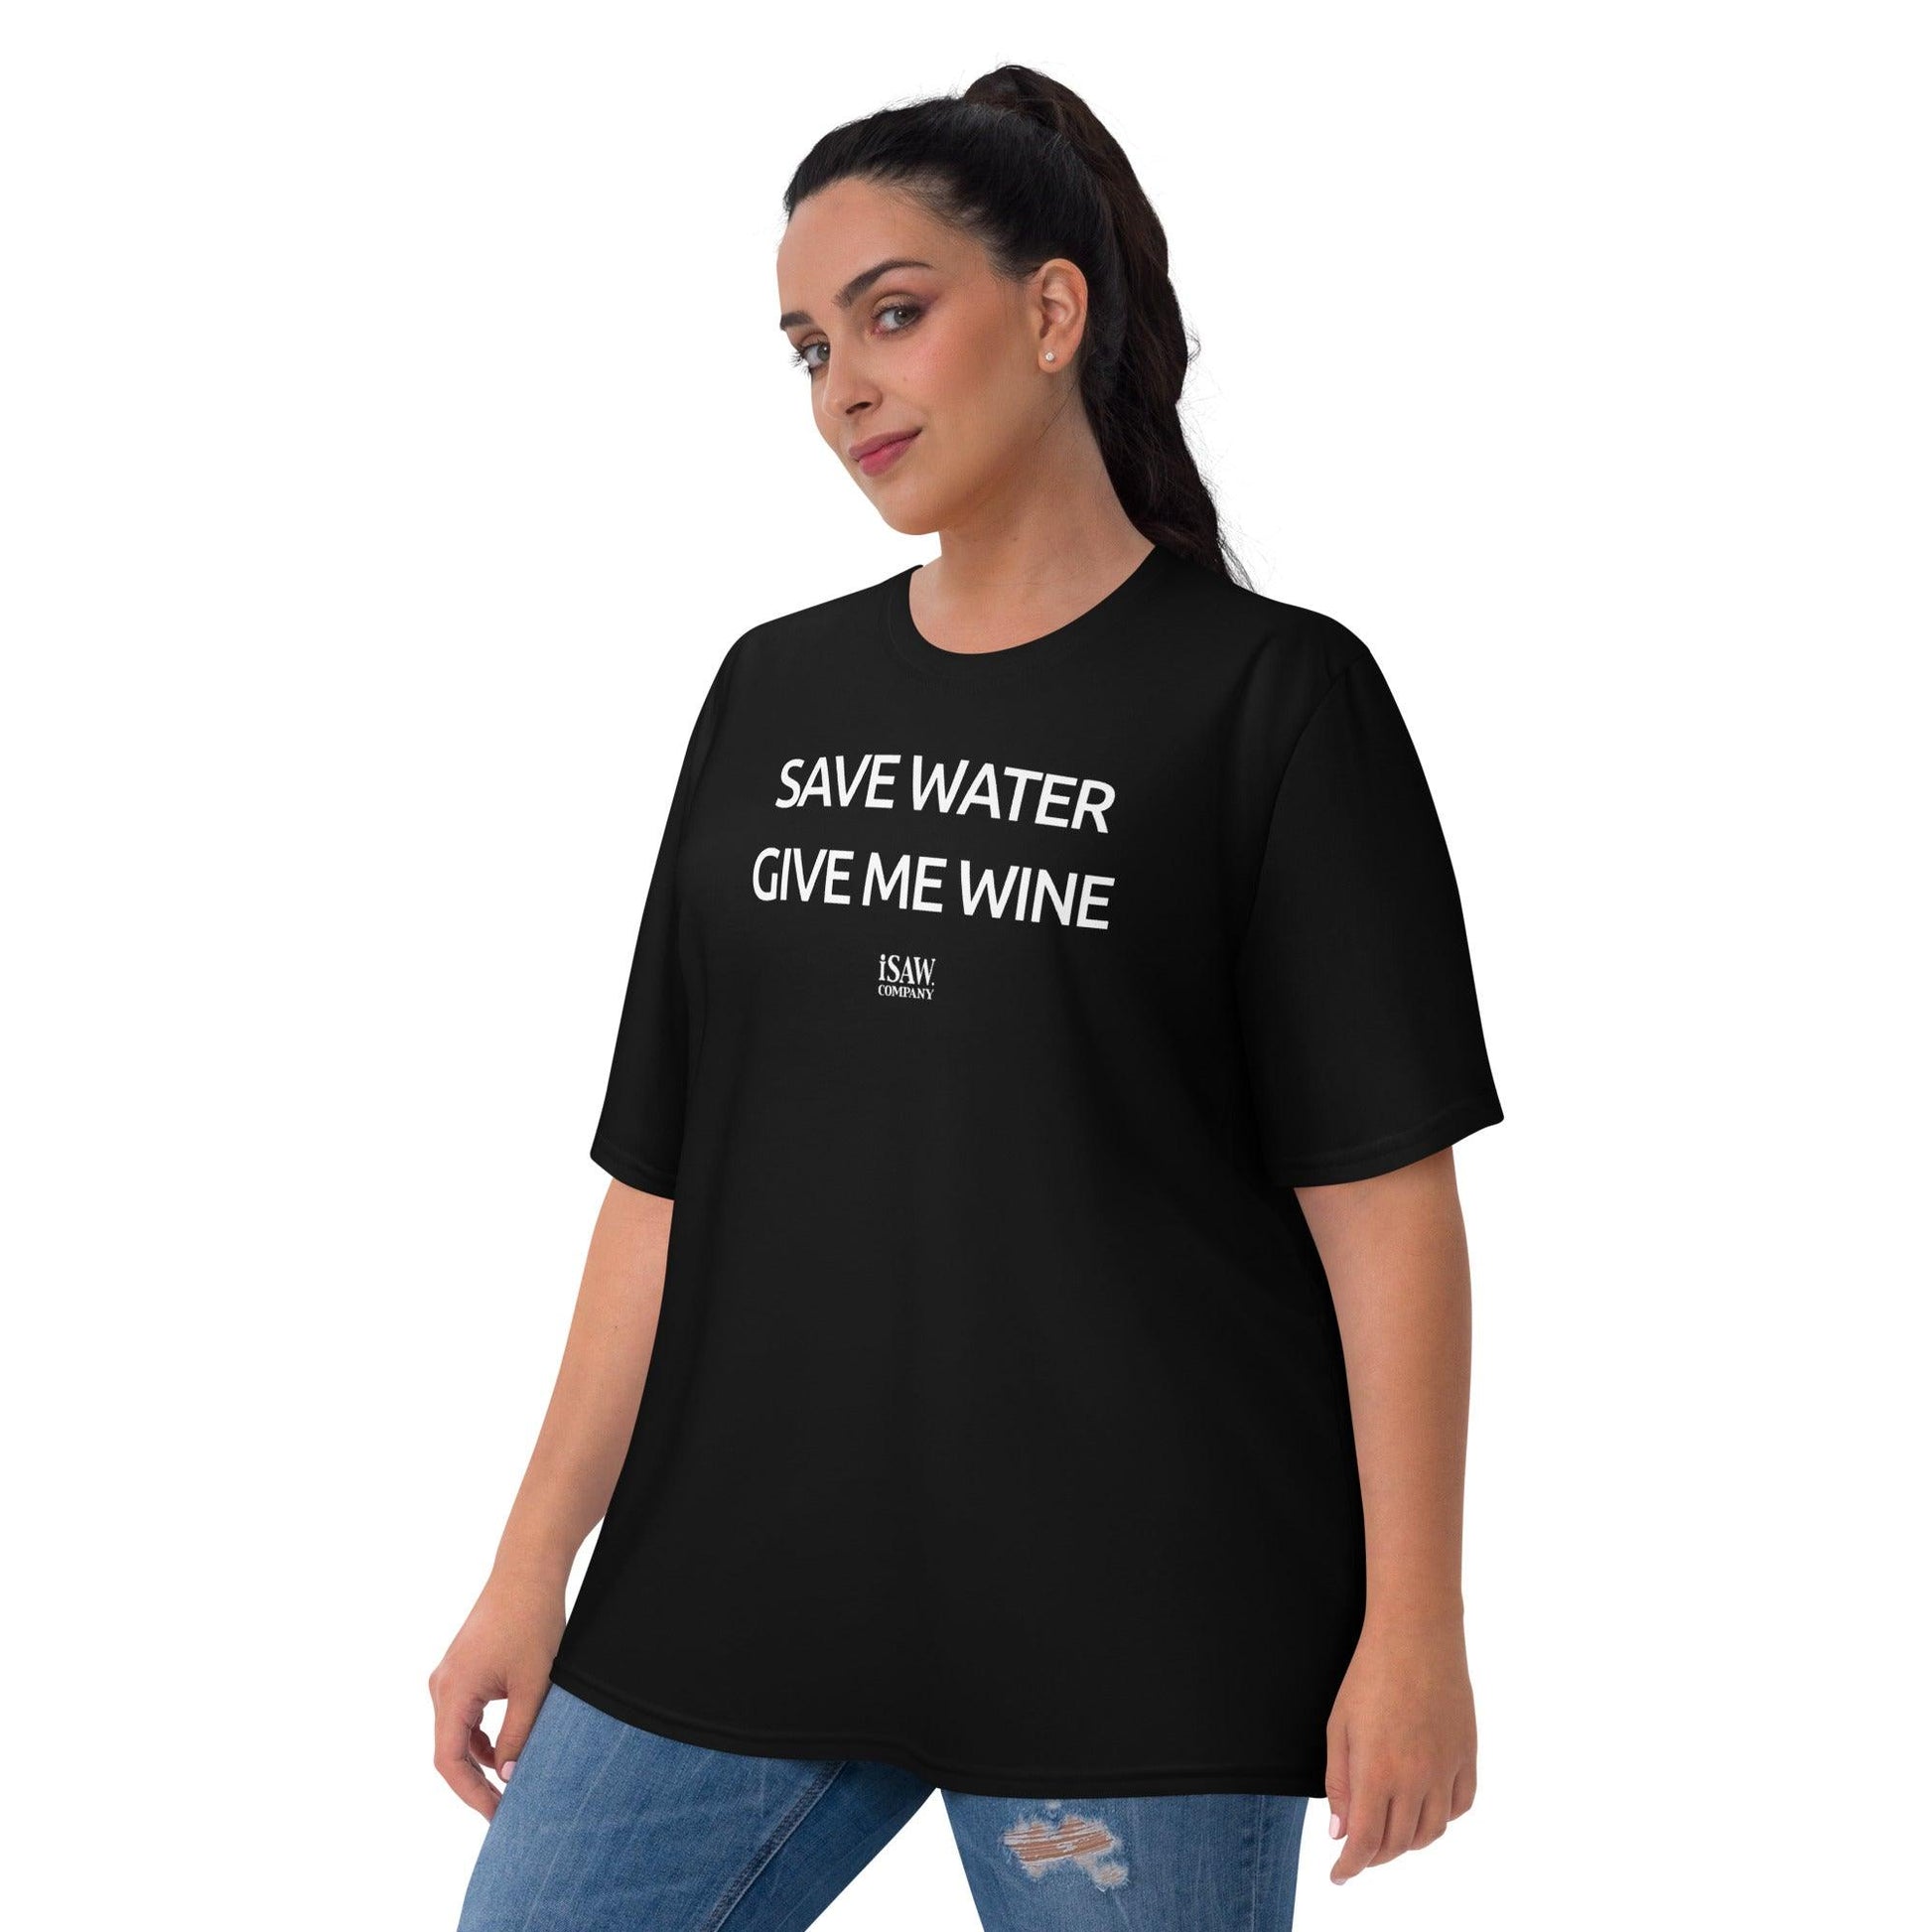 Save Water Give Me Wine - Womens Black T-Shirt - iSAW Company